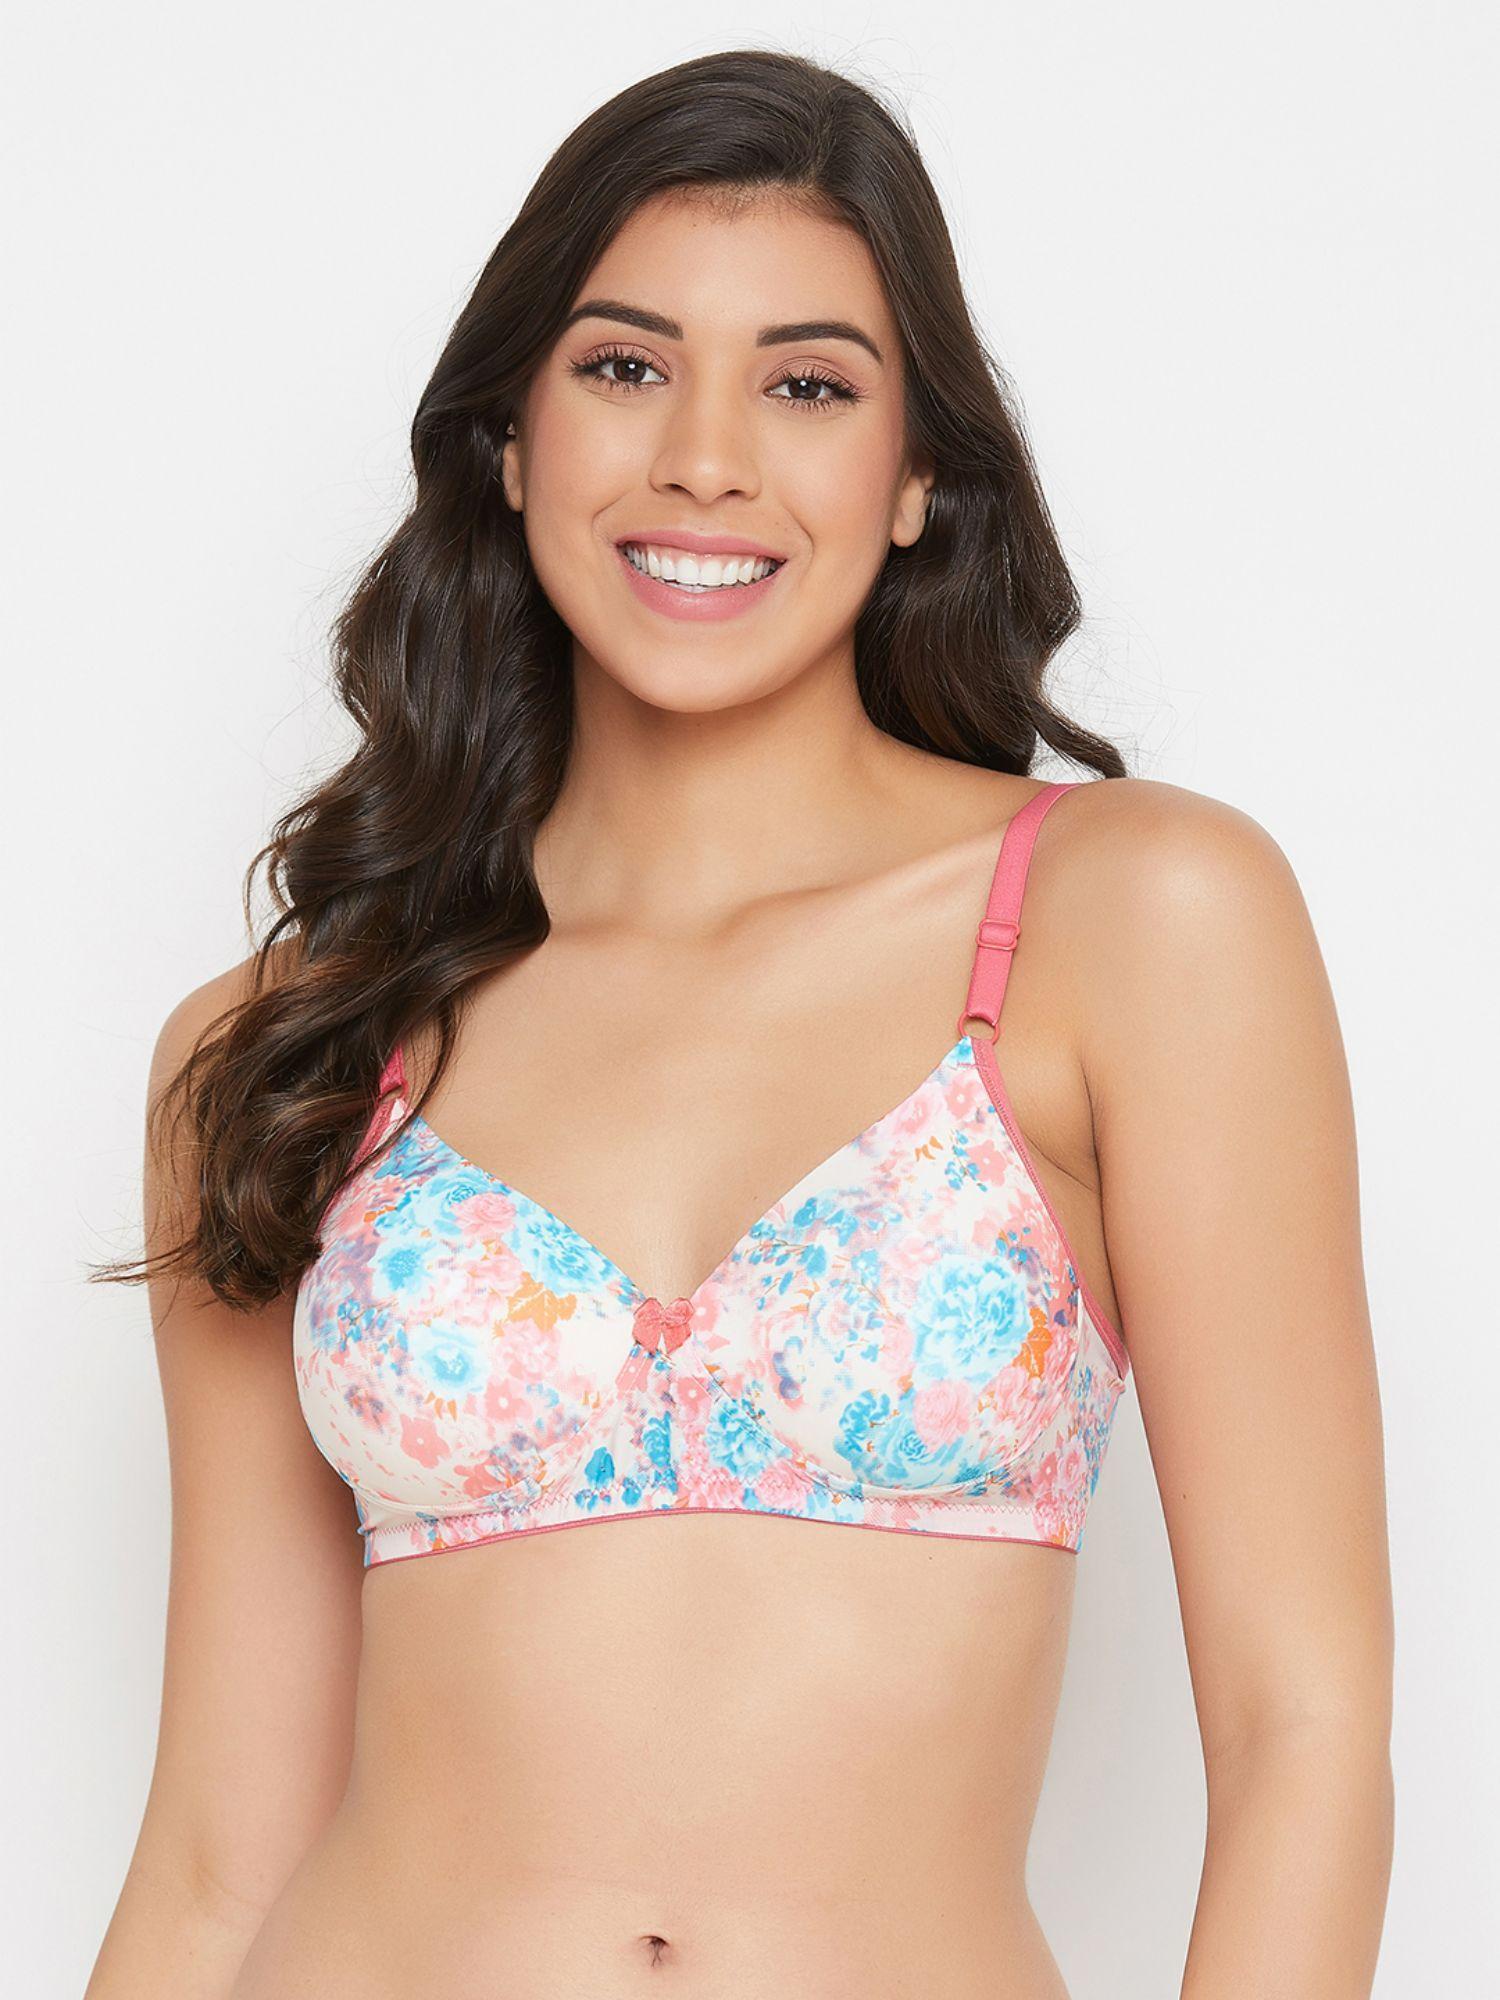 padded non-wired full cup floral print t-shirt bra in multi color